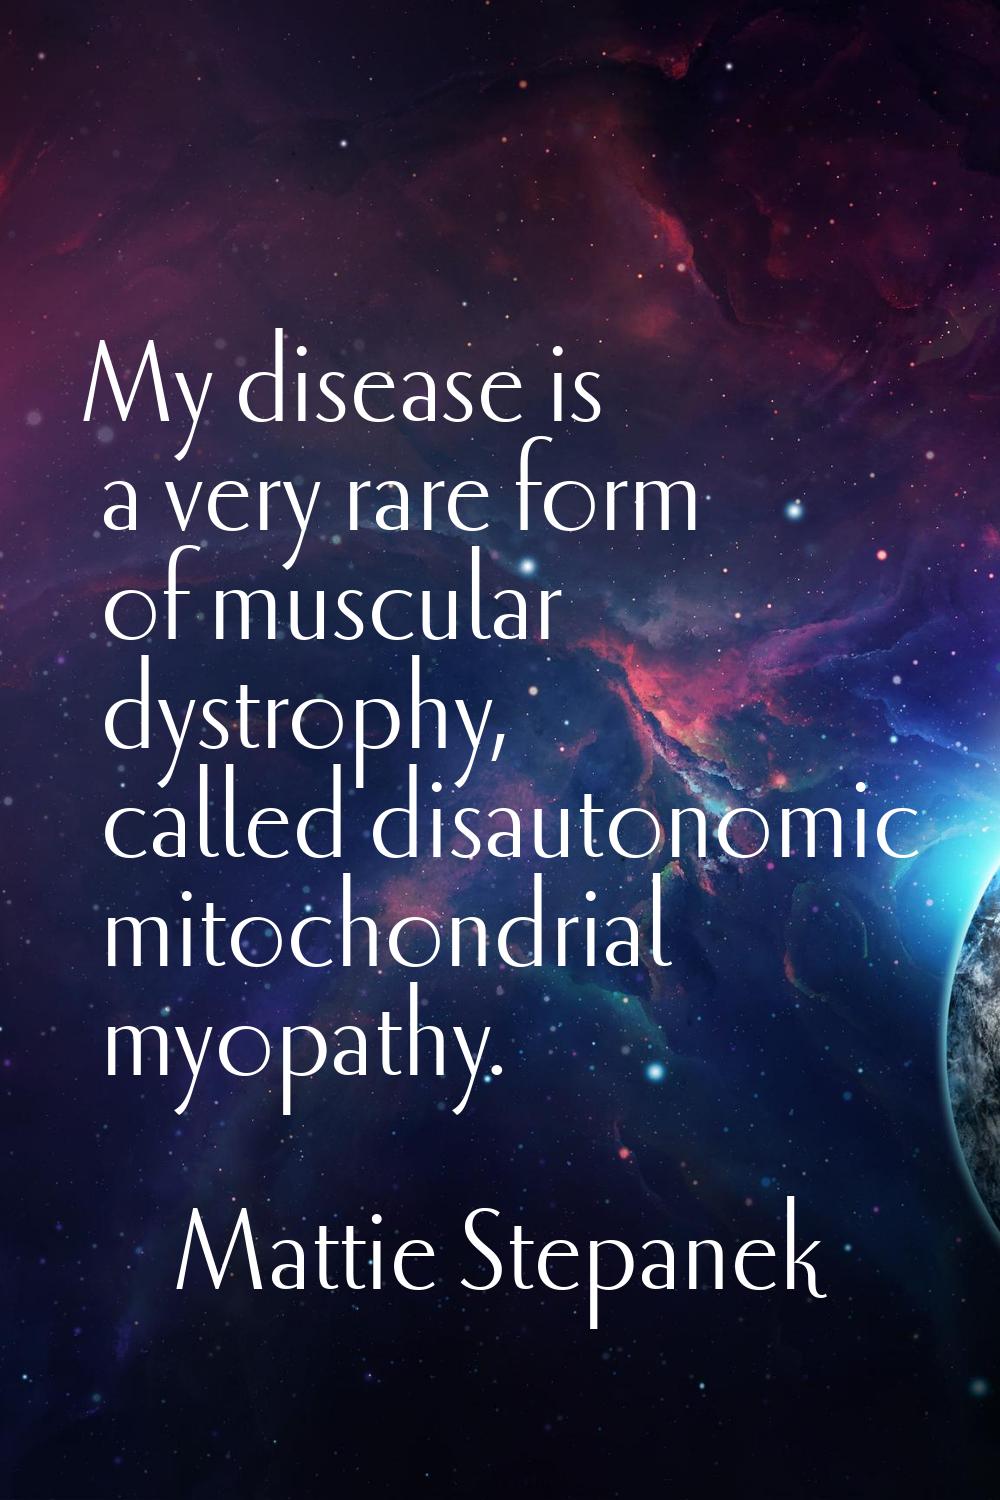 My disease is a very rare form of muscular dystrophy, called disautonomic mitochondrial myopathy.